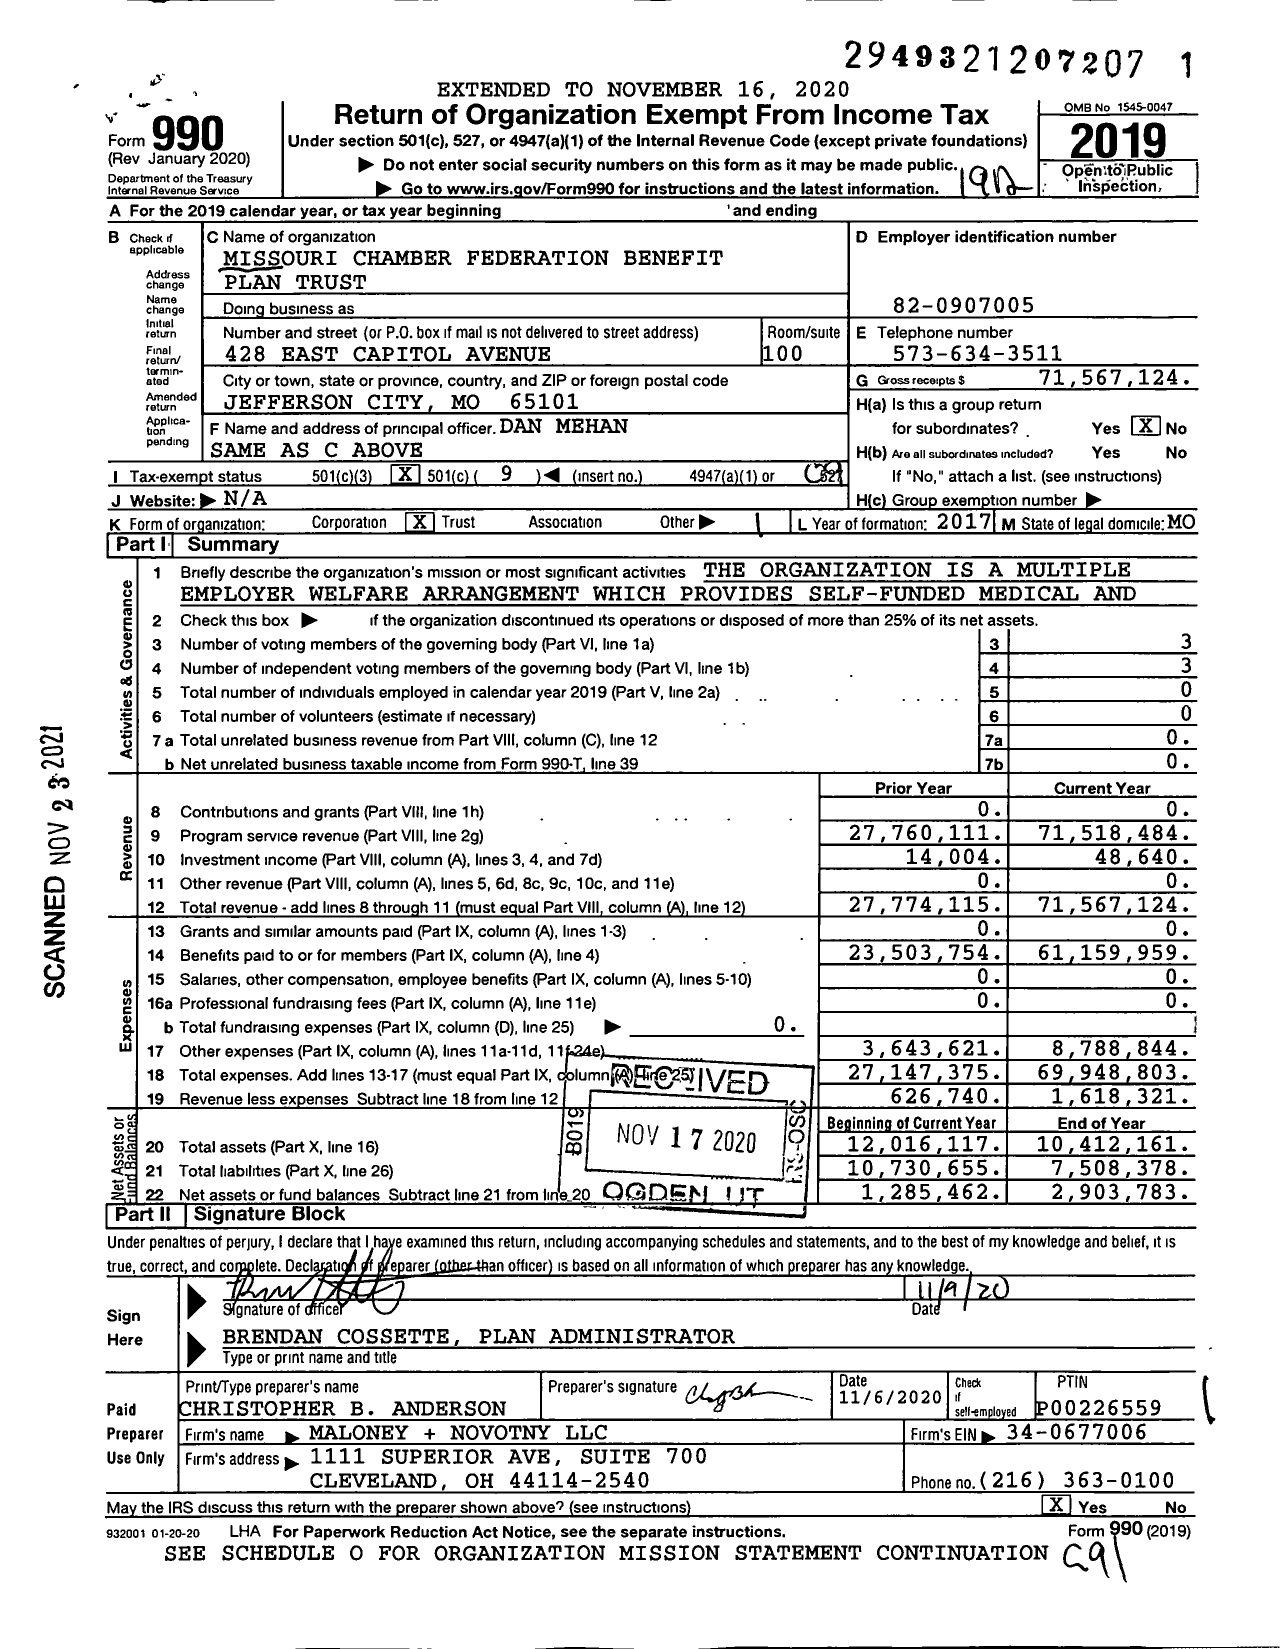 Image of first page of 2019 Form 990O for Missouri Chamber Federation Benefit Plan Trust